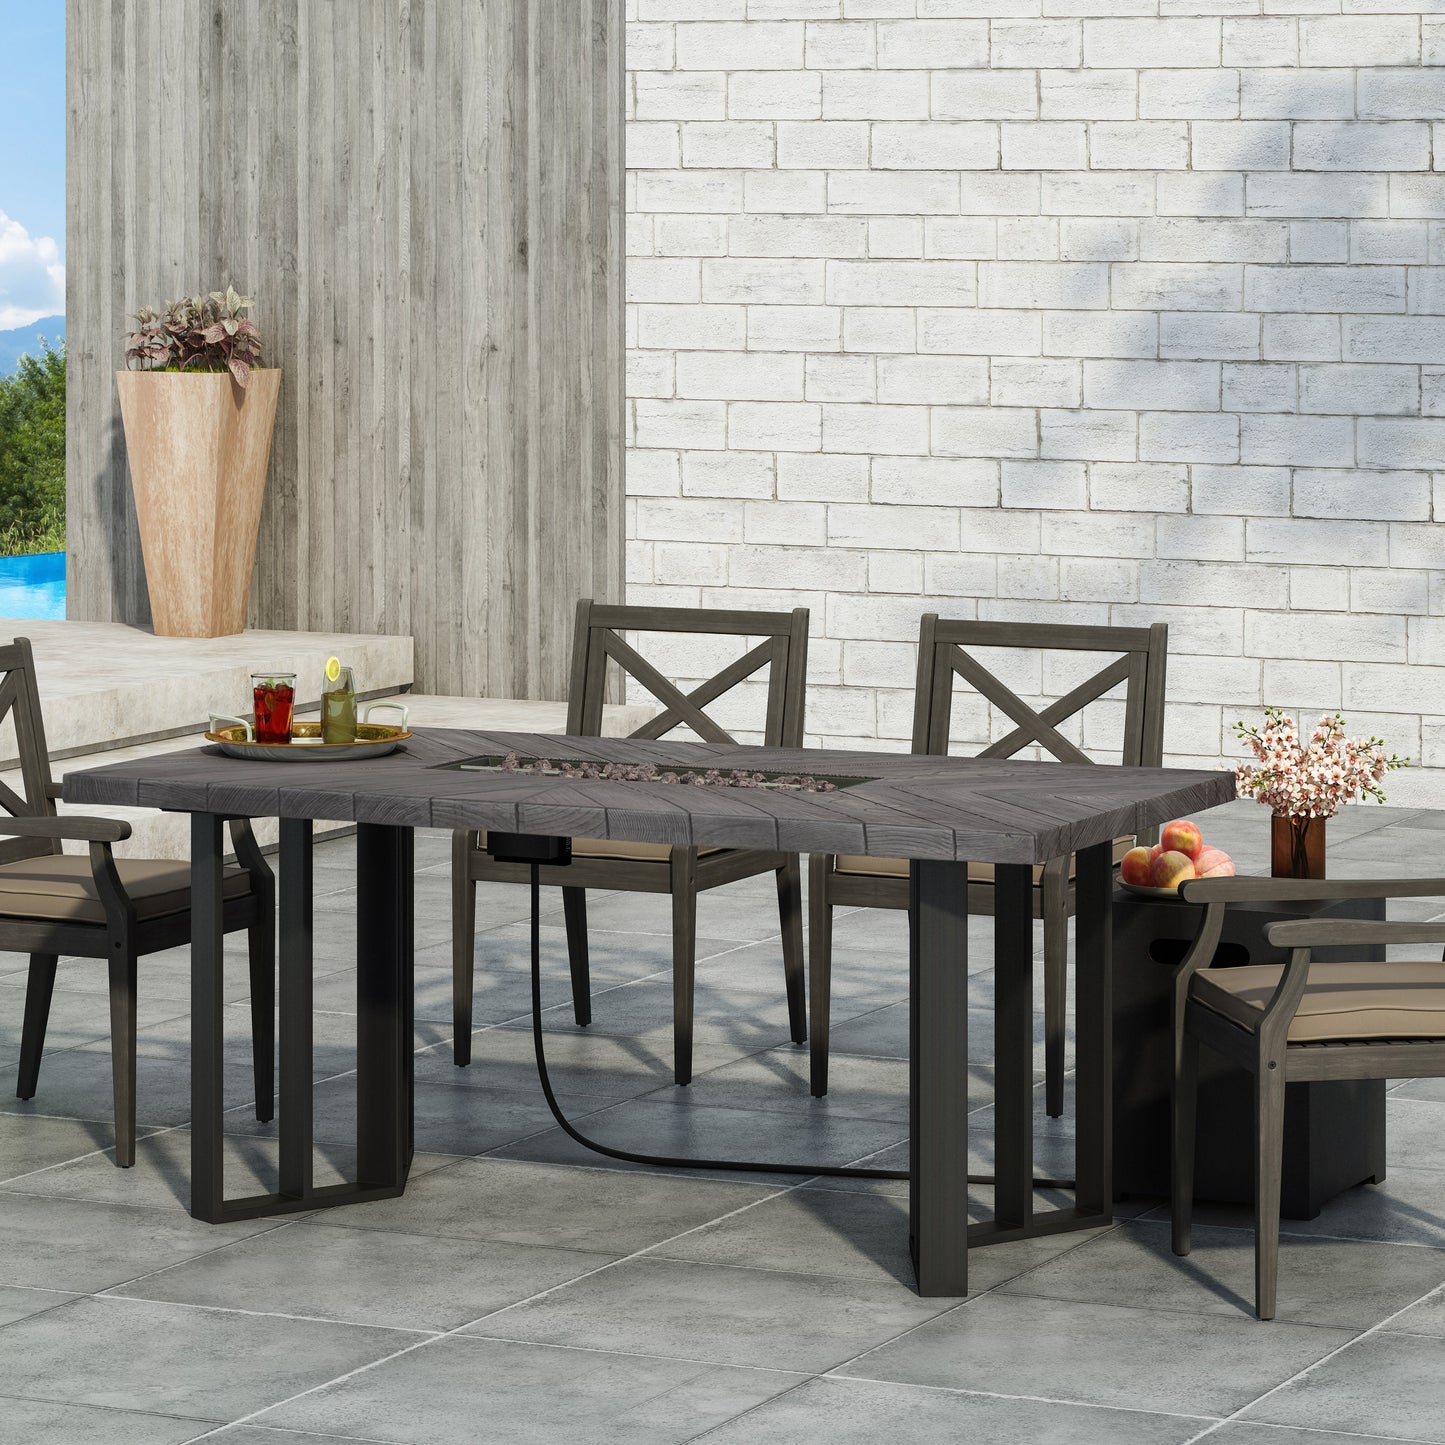 Holdaway Outdoor 40,000 BTU Fire Pit Dining Table with Tank Holder, Textured Gray Oak, Black, and Dark Gray